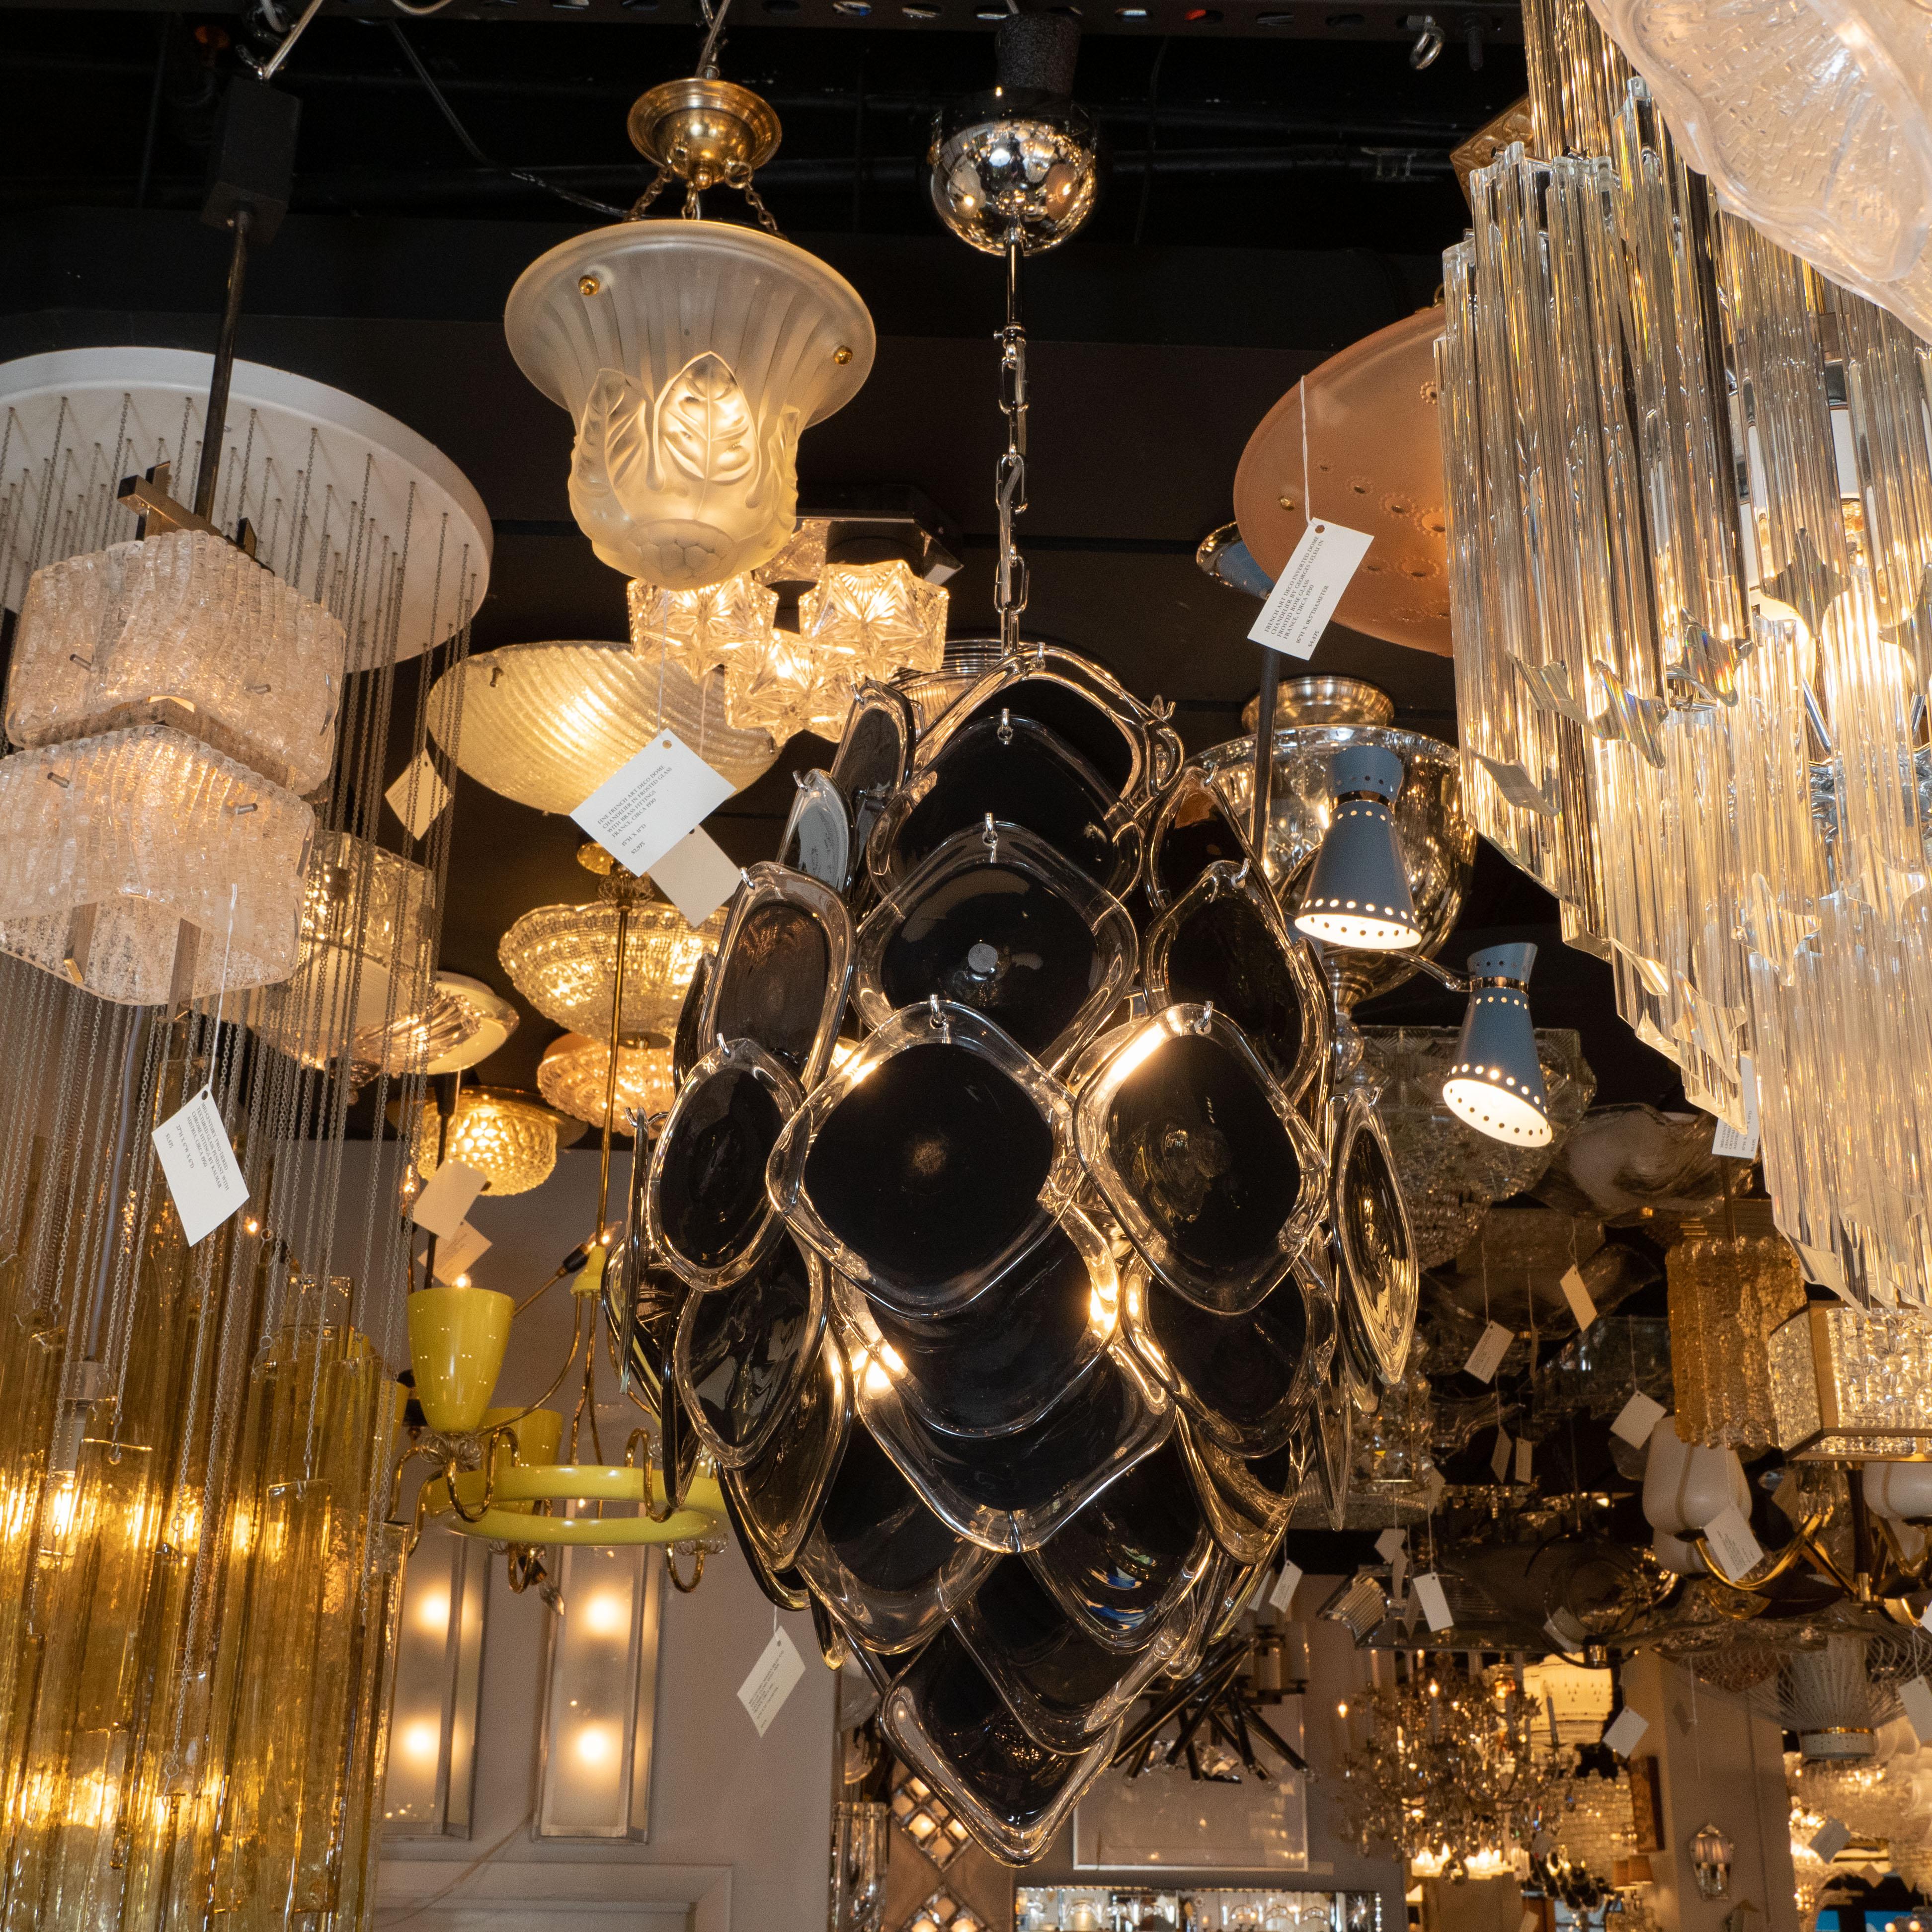 This stunning chandelier was hand blown in Murano, Italy- the island off the coast of Venice renowned for centuries for its superlative glass production. It features a cylindrical form that tapers at each end consisting of an abundance of hand blown